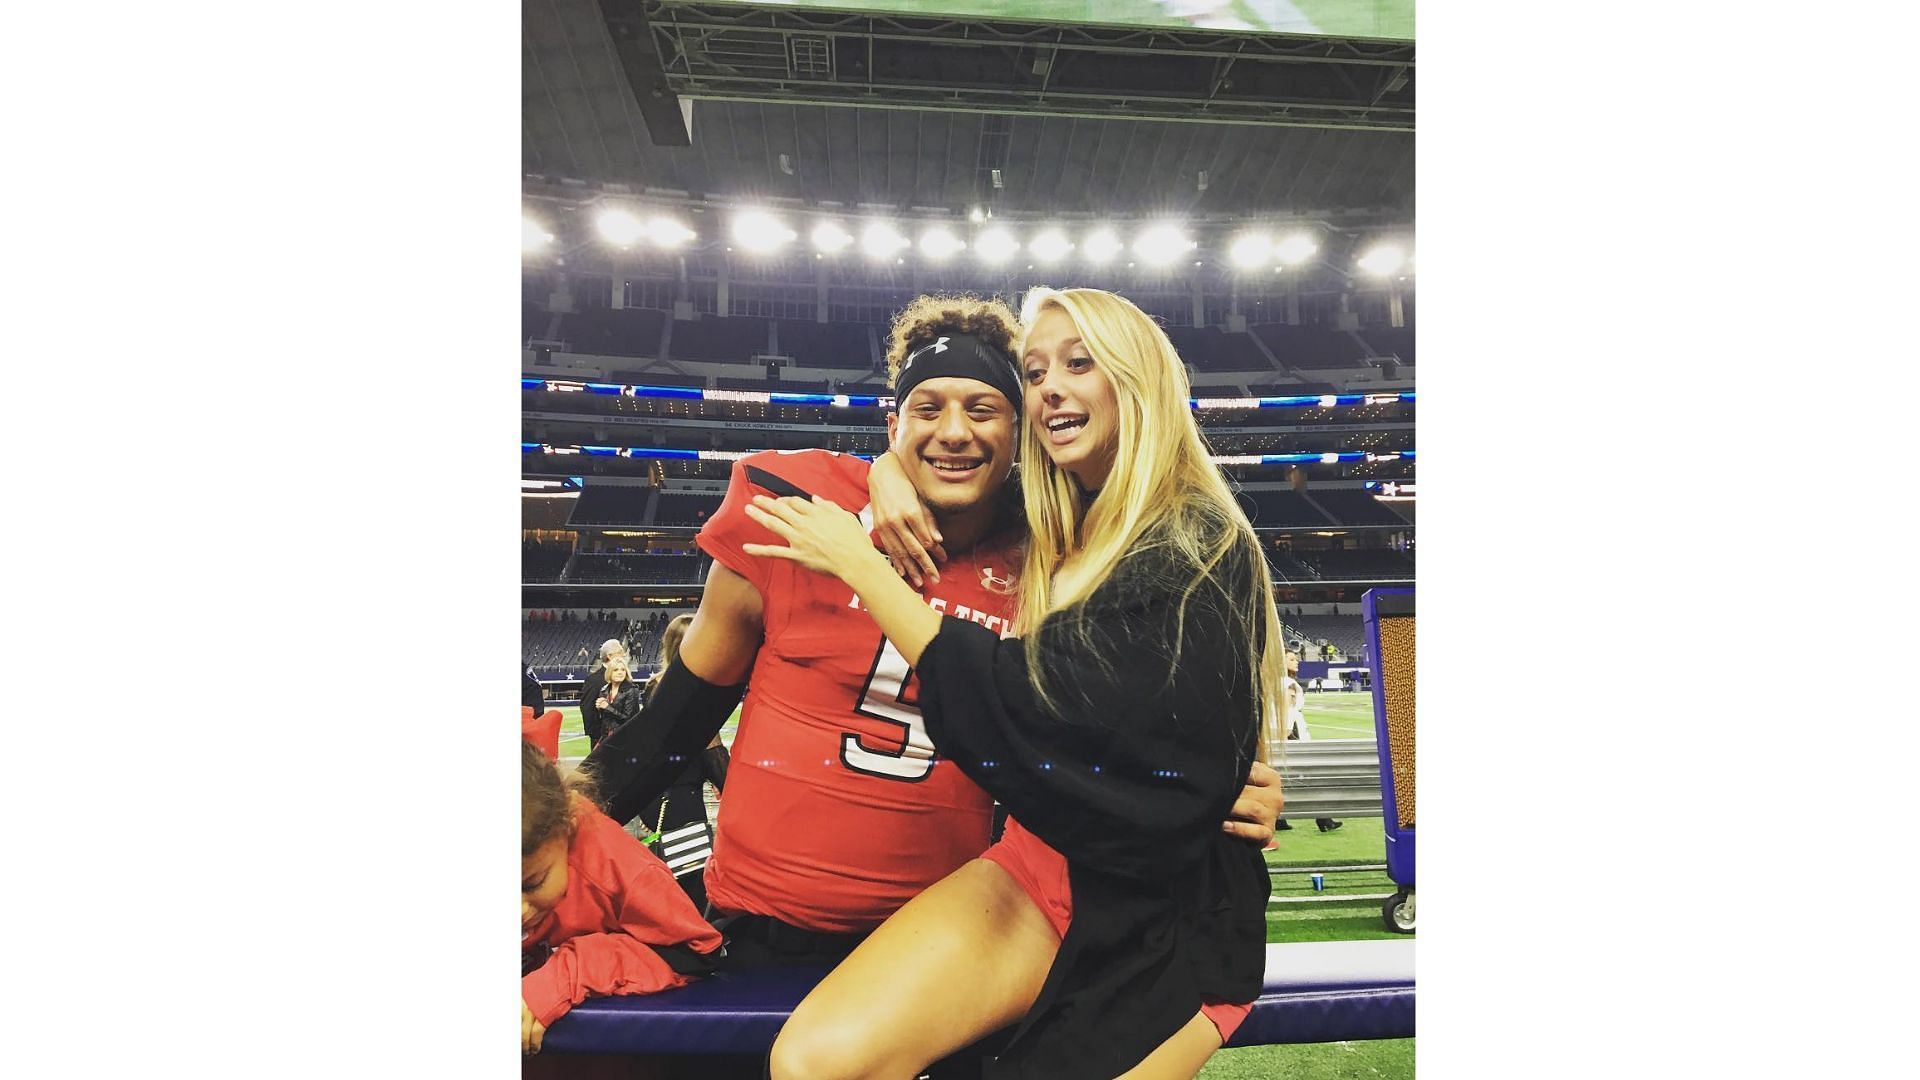 Image Credit: Brittany Mahomes&#039; Instagram account